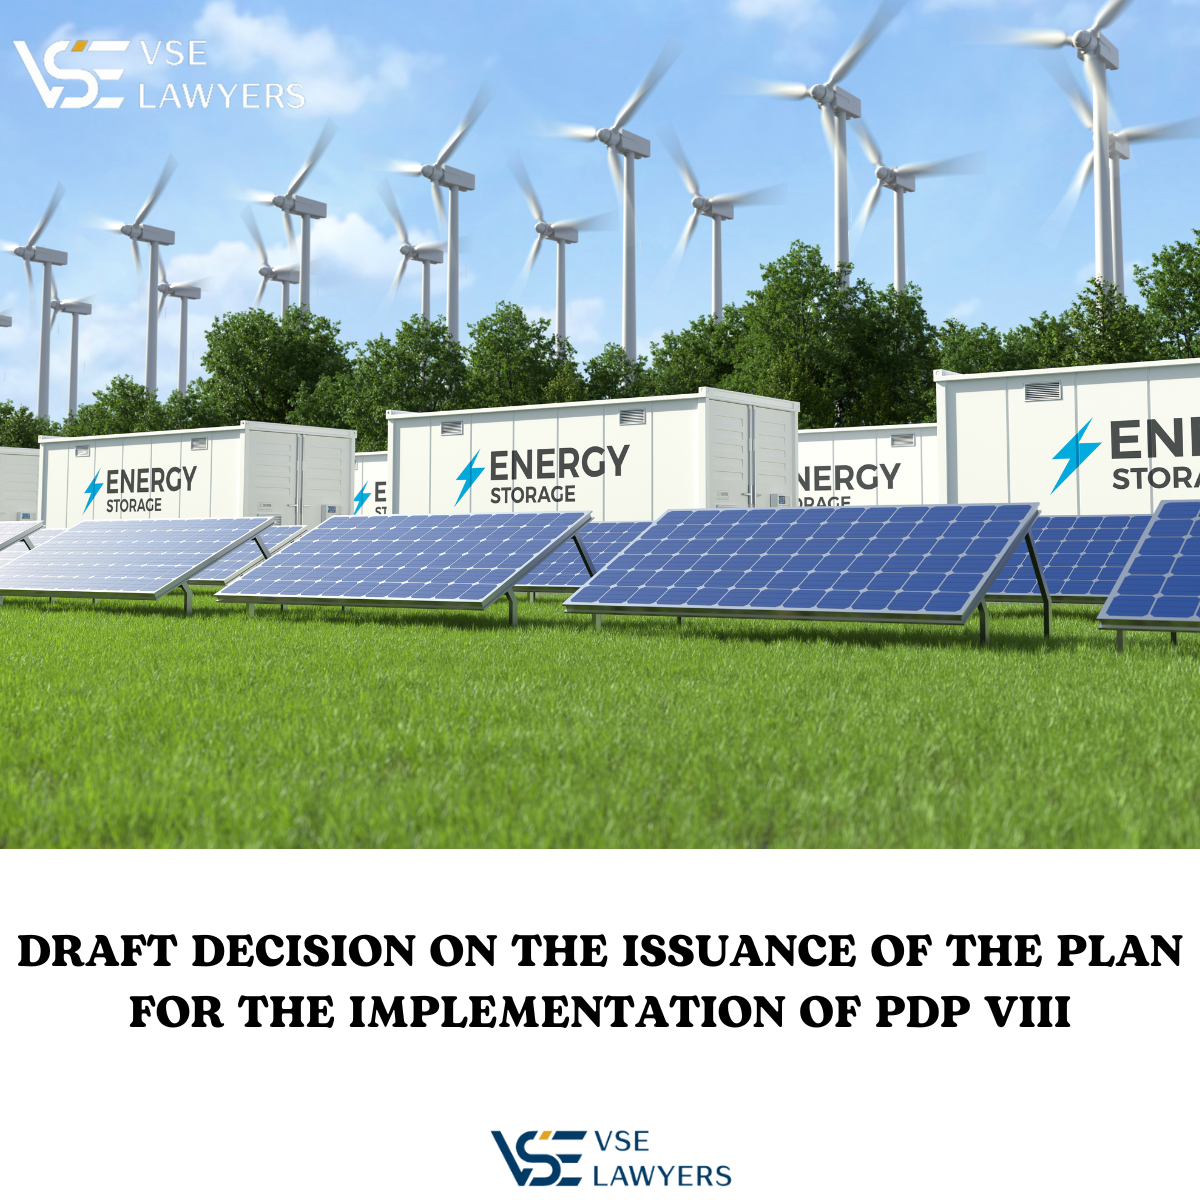 DRAFT DECISION ON THE ISSUANCE OF THE PLAN FOR THE IMPLEMENTATION OF PDP VIII